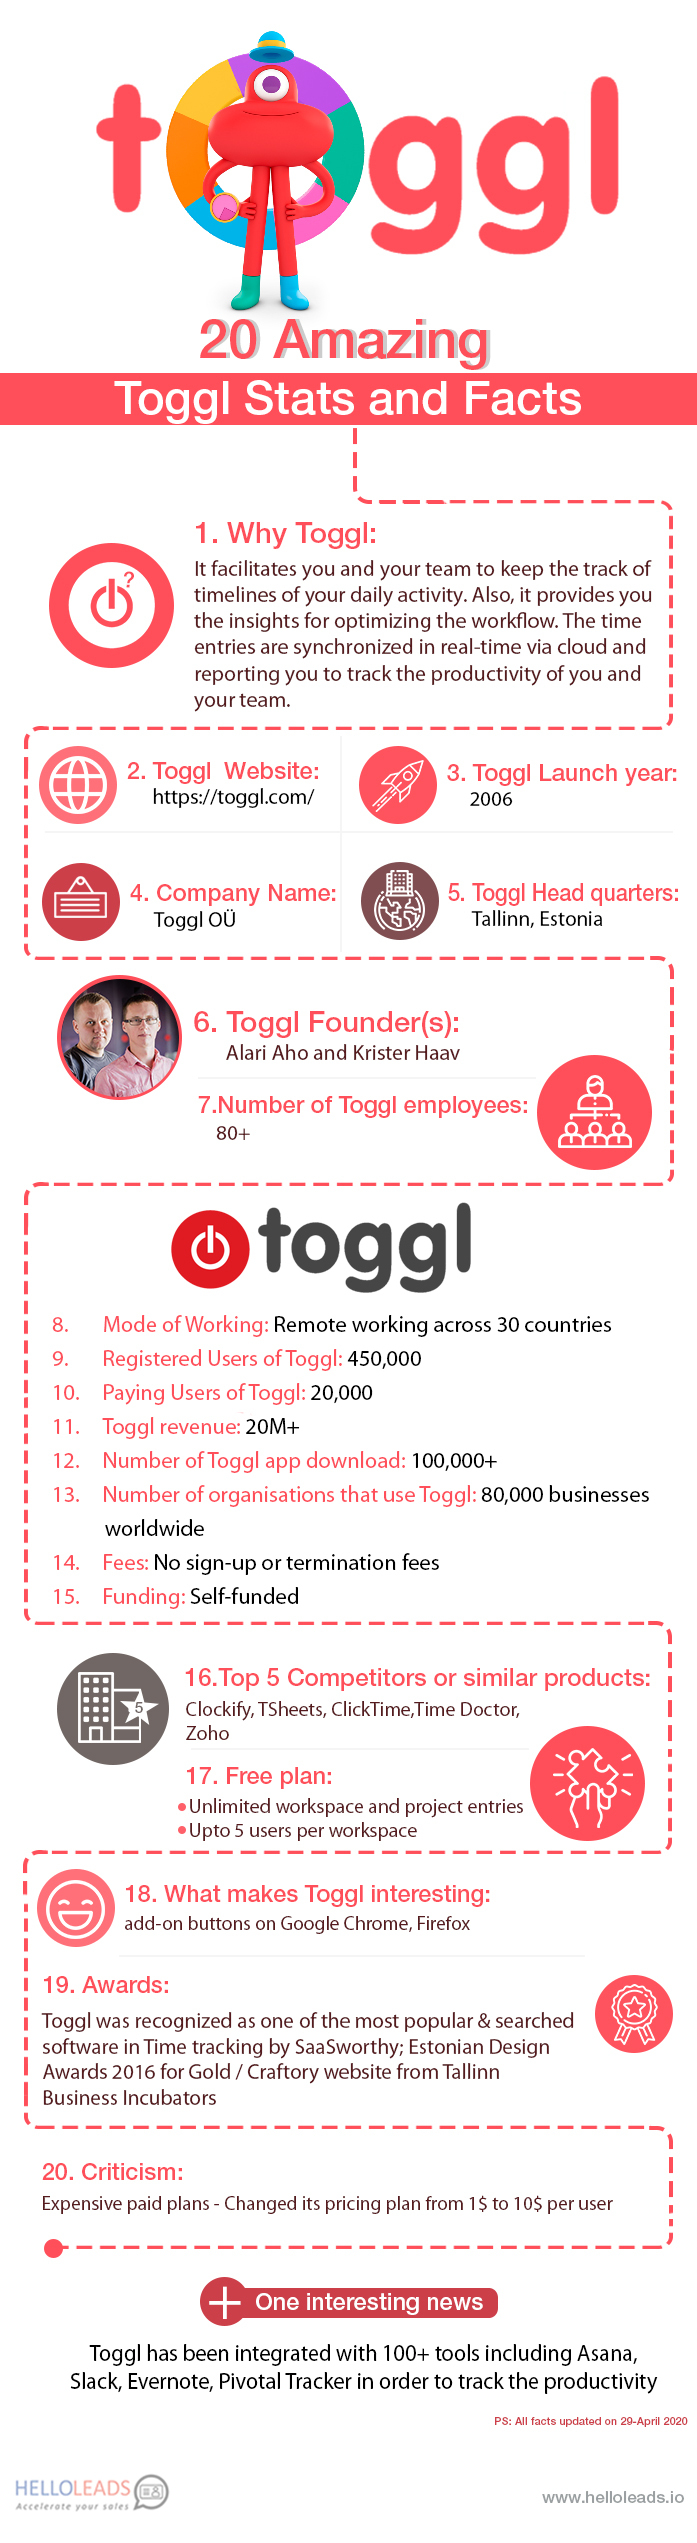 Toggl - 20 Amazing Stats & Facts